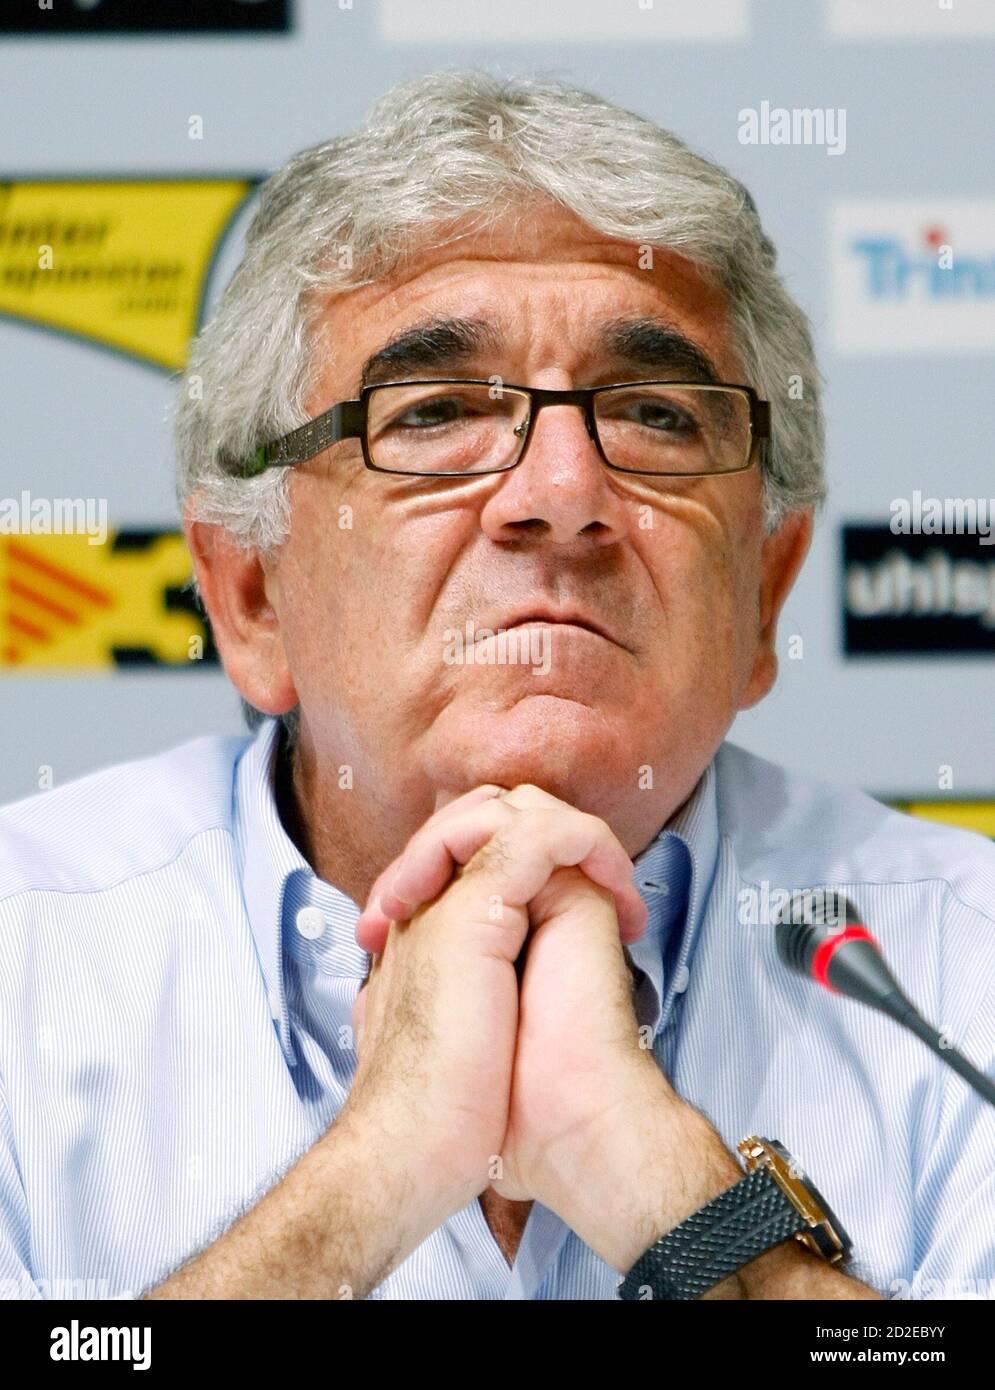 Espanyol's President Daniel Sanchez Llibre attends a news conference during  the official presentation of his new players in Barcelona August 27, 2009.  REUTERS/Albert Gea (SPAIN SPORT SOCCER HEADSHOT Stock Photo - Alamy